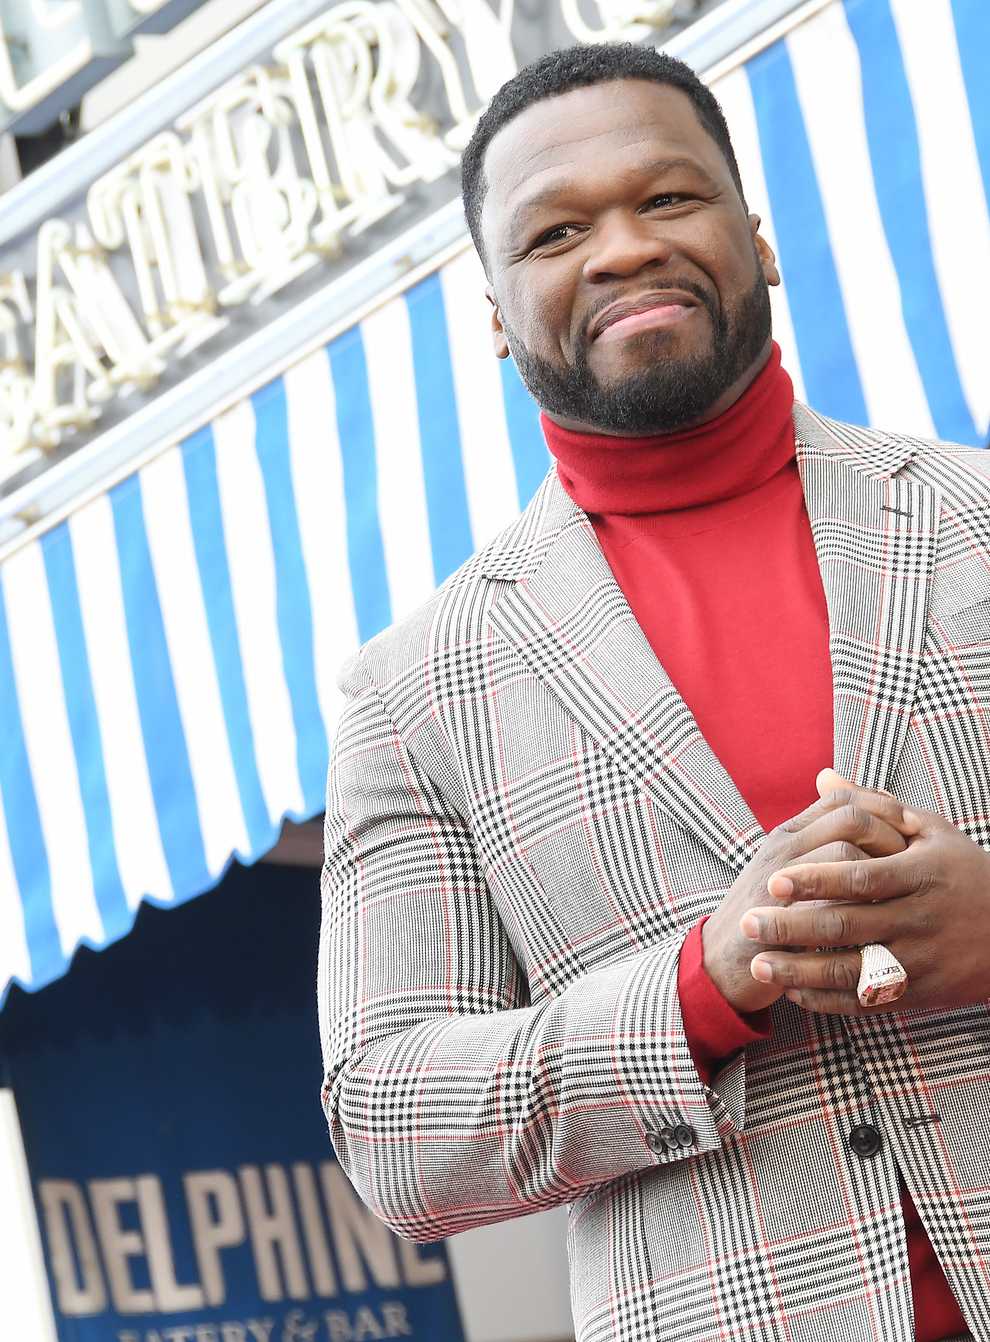 50 Cent has done a full U-turn on his support for President Trump